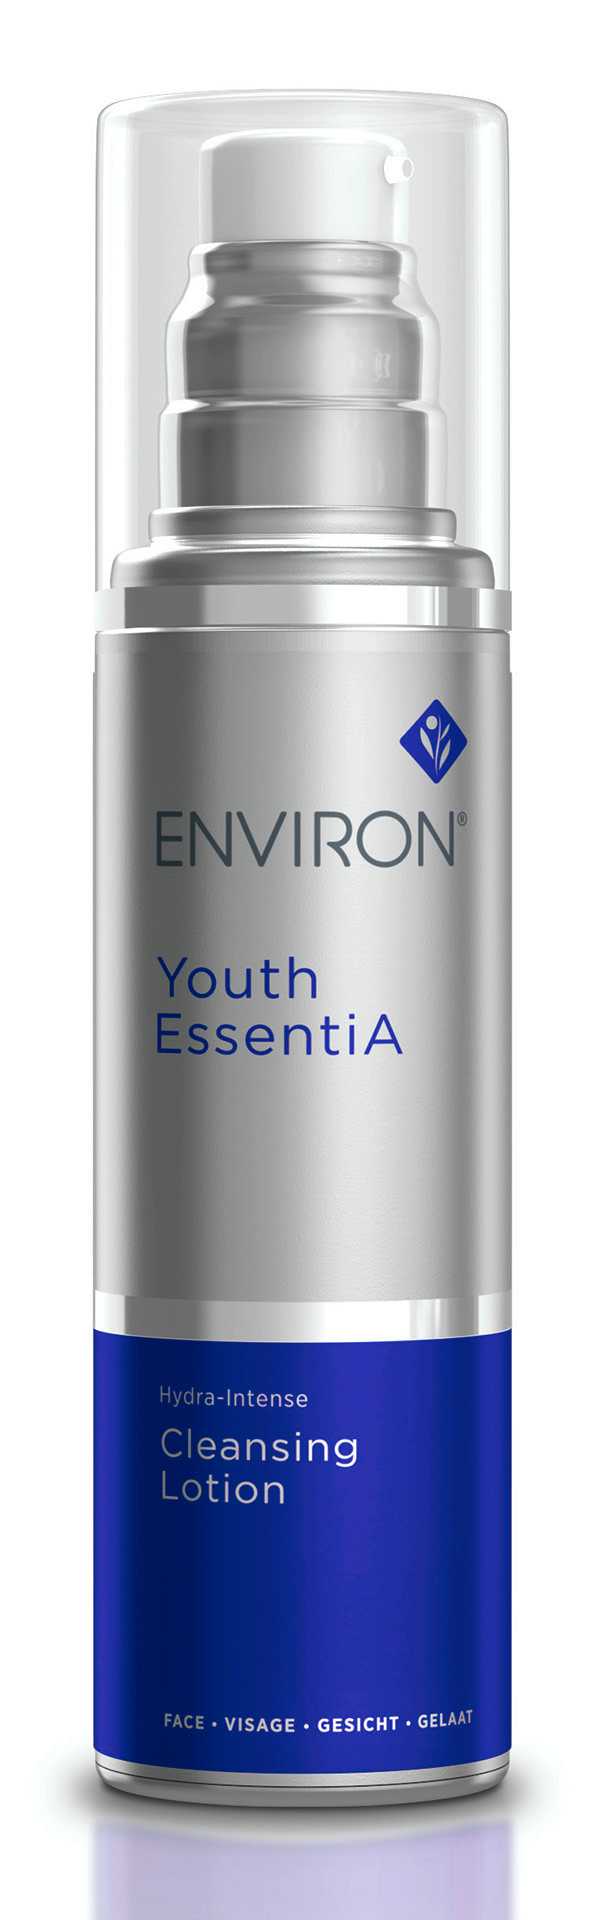 Youth EssentiA | Hydra Intense Cleansing Lotion